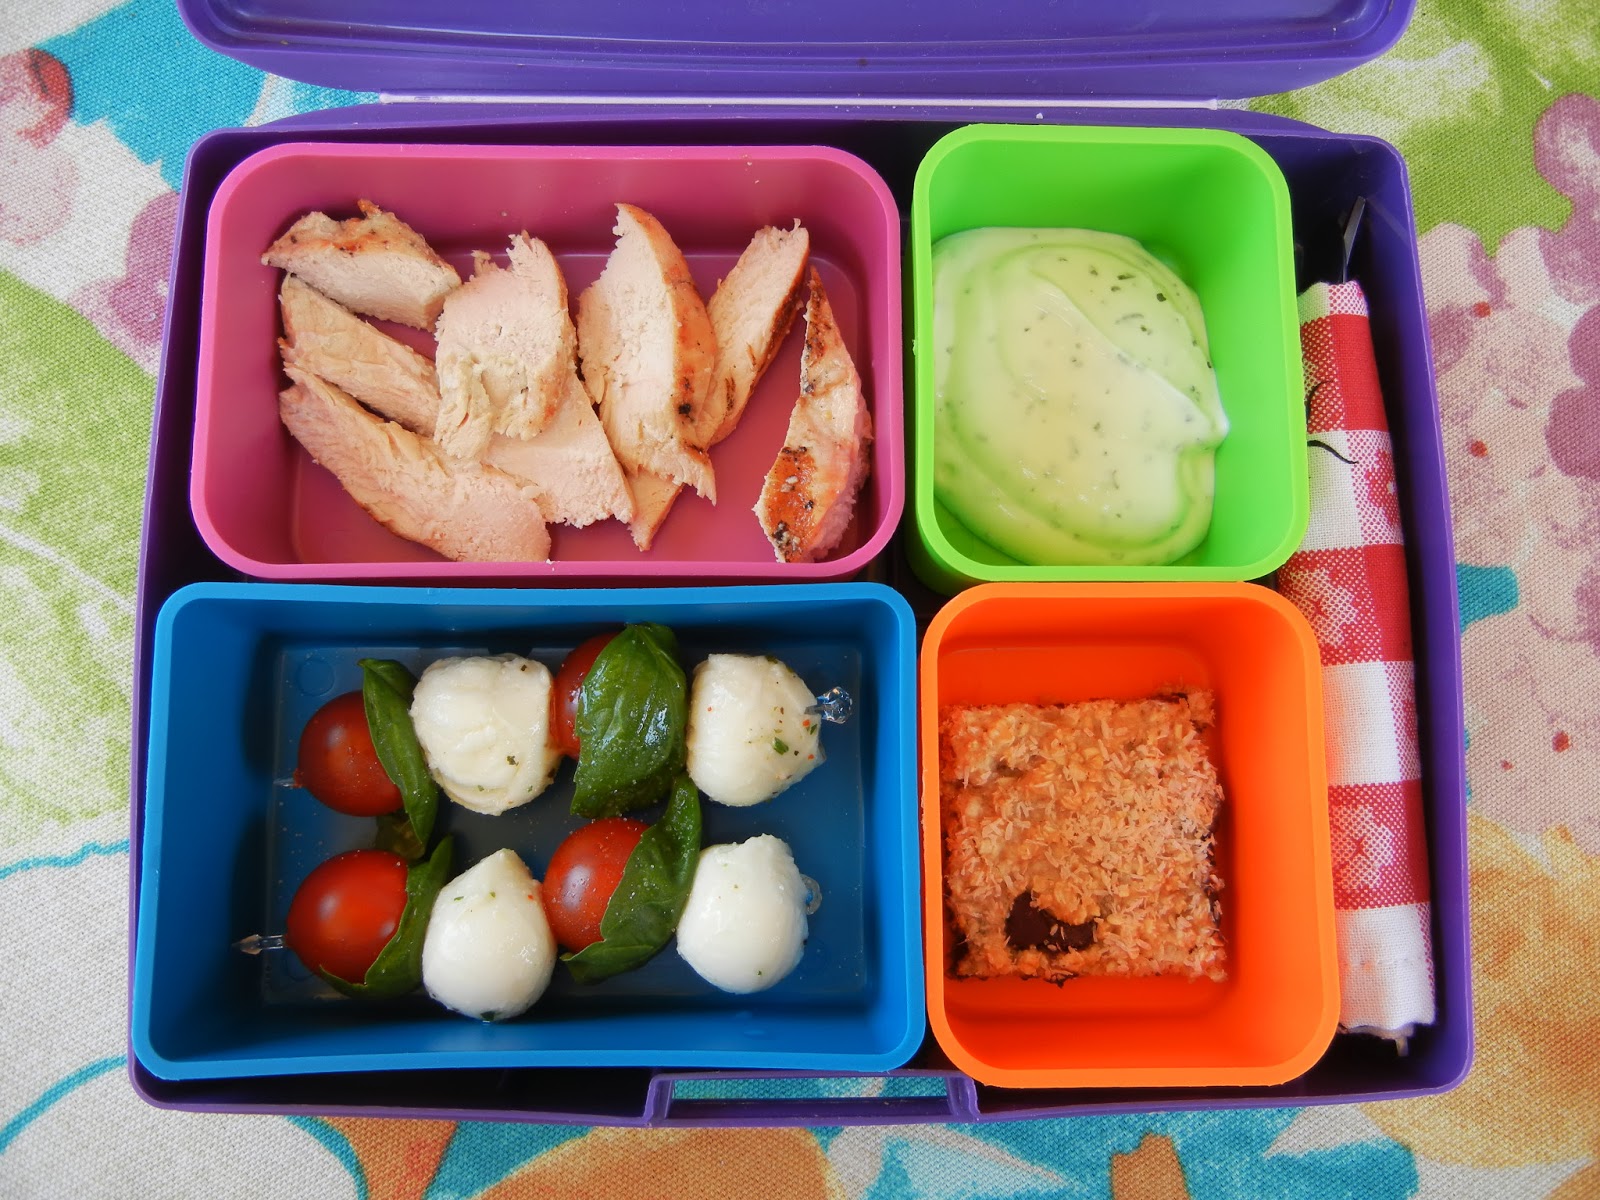 120 Lunch: Bento licious ideas  bariatric recipes, bariatric eating, lunch